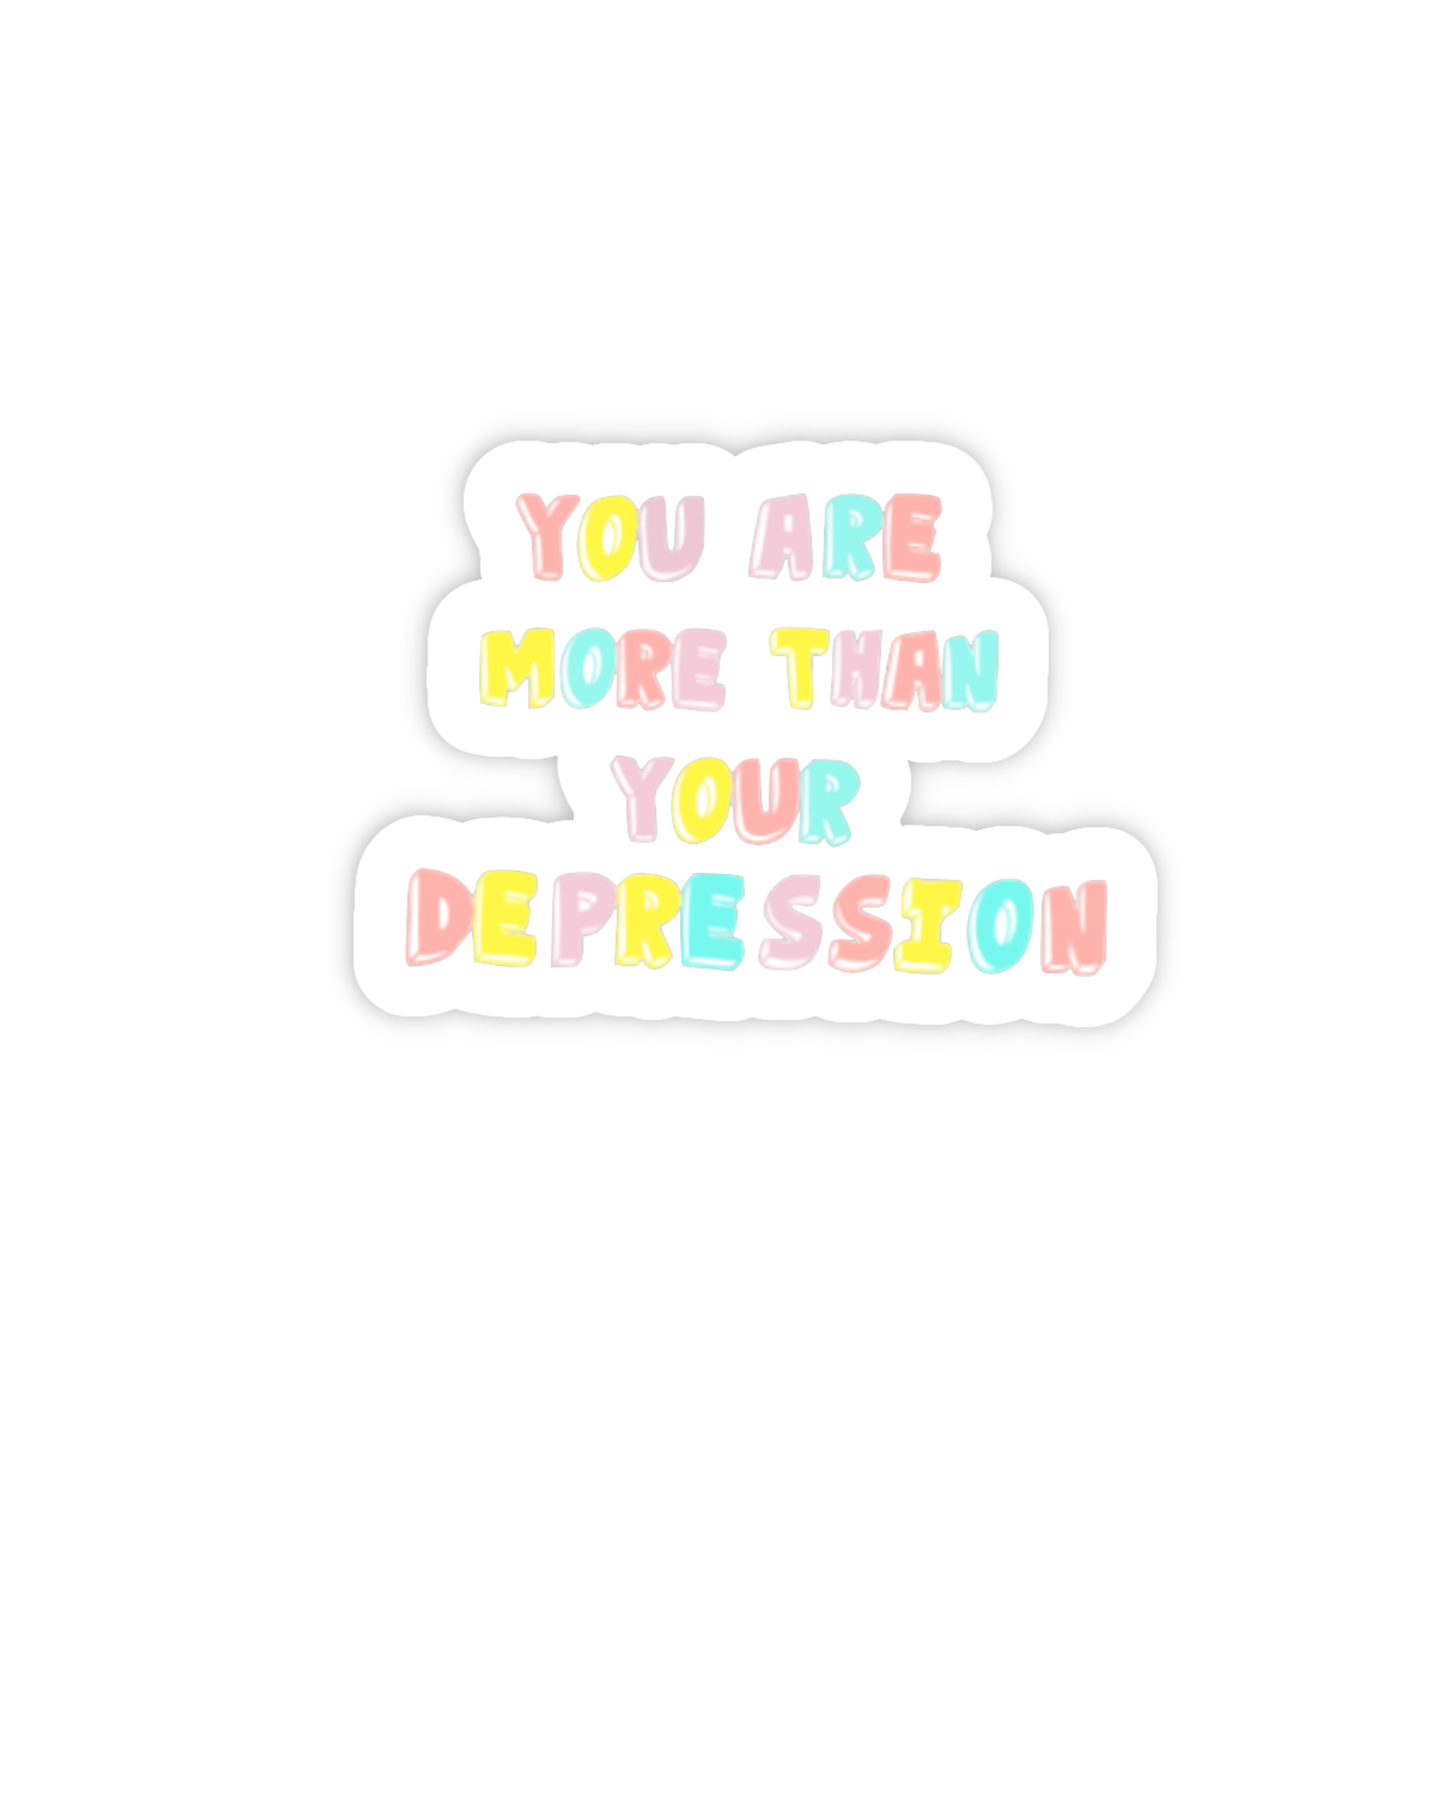 You are more than your depression mental health sticker